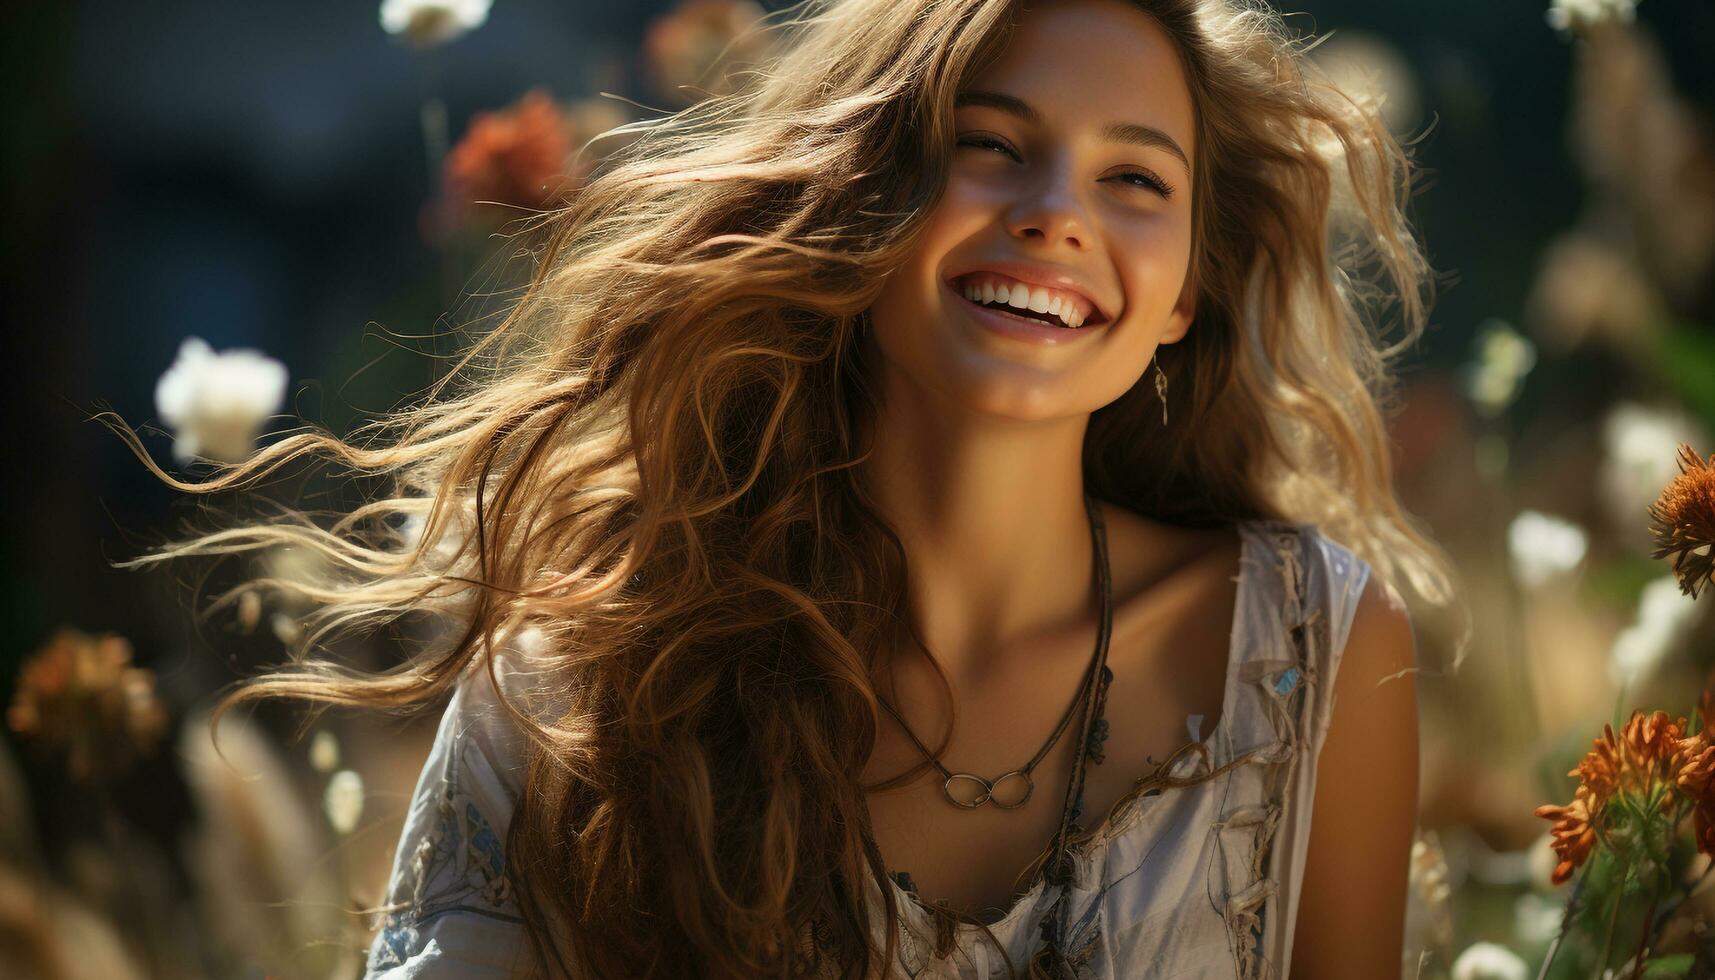 Smiling woman outdoors, enjoying nature, carefree and full of happiness generated by AI photo